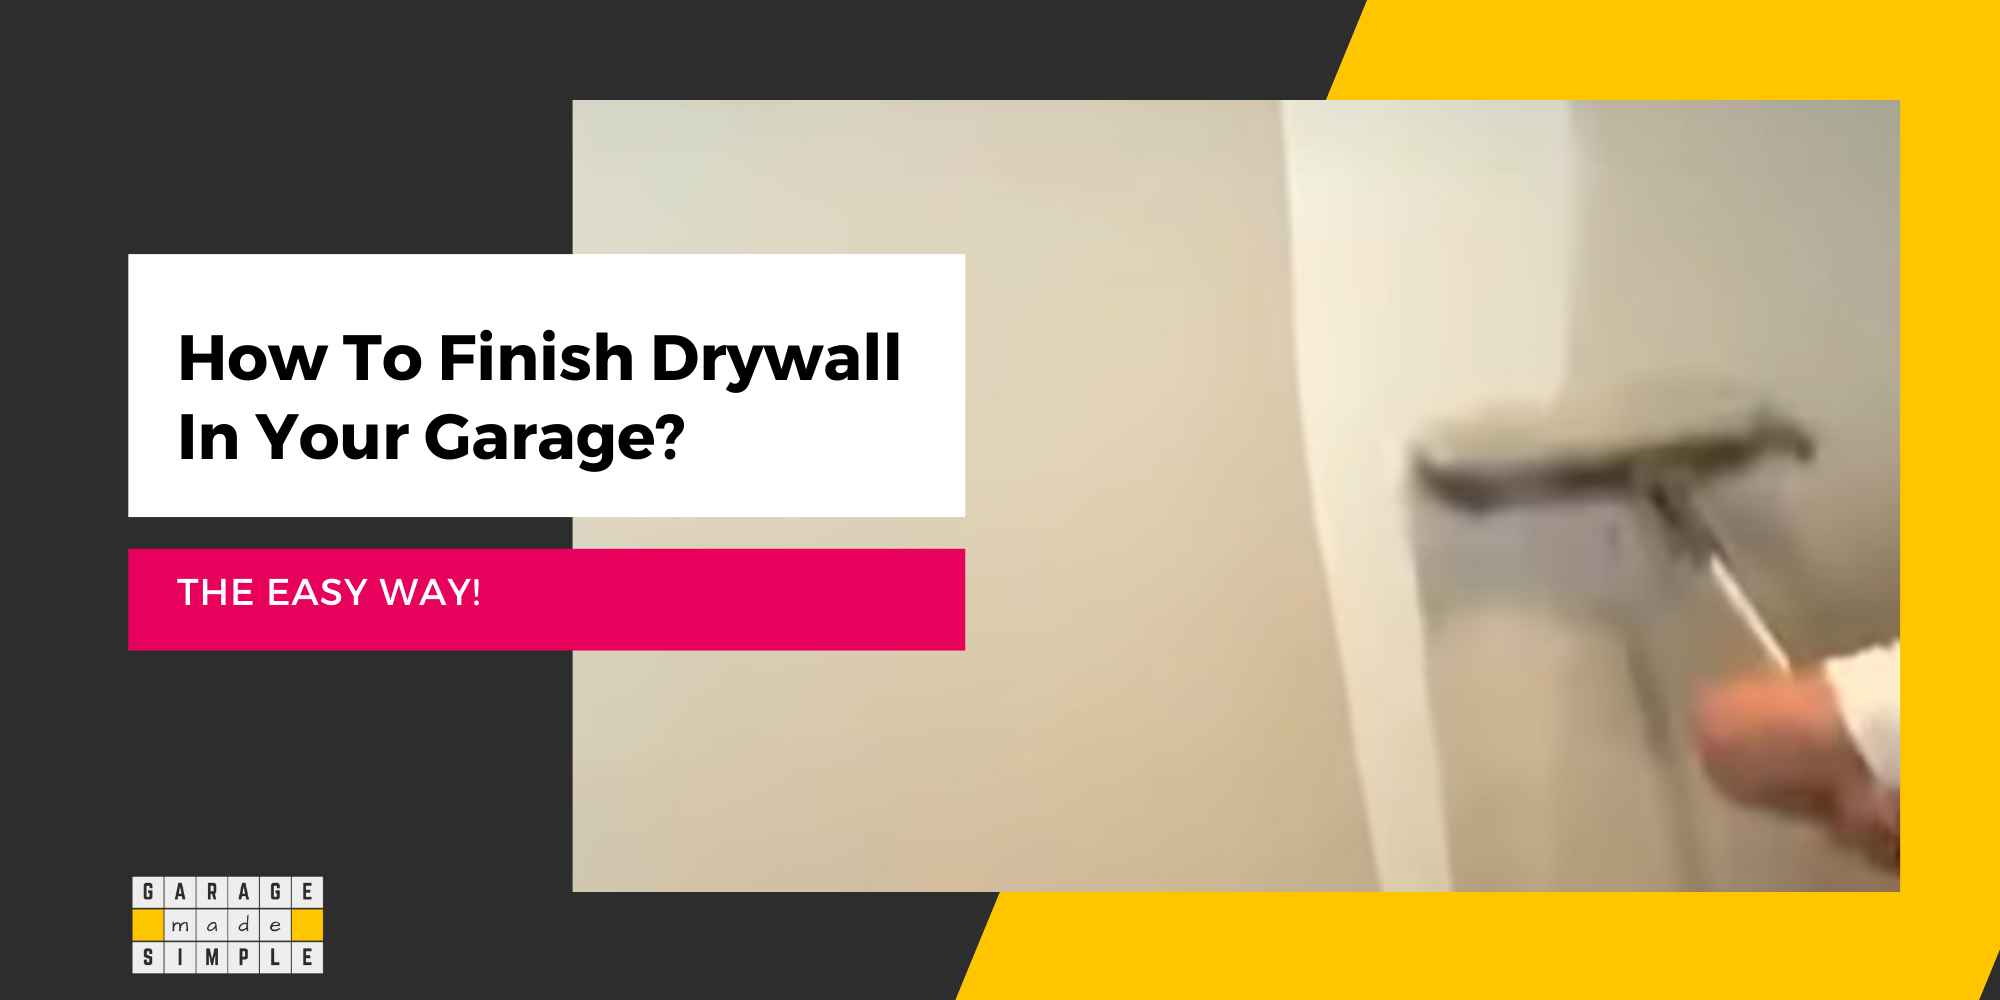 Why Finish Drywall In Garage? An Easy How-To Guide